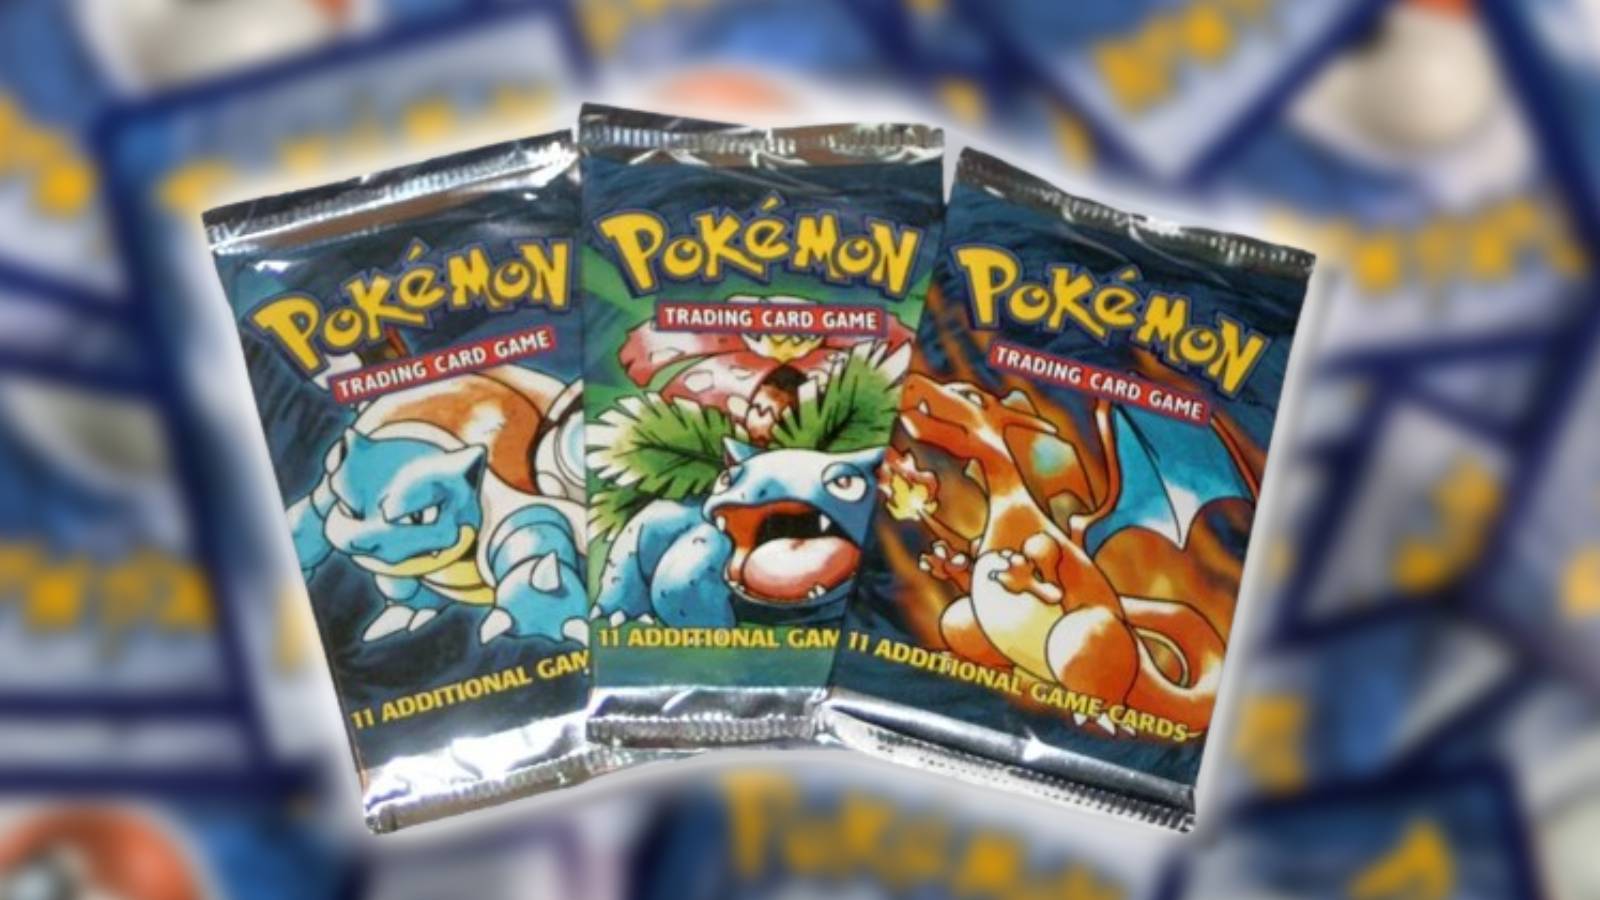 Three base set Pokemon Booster Packs are shown against a blurred background